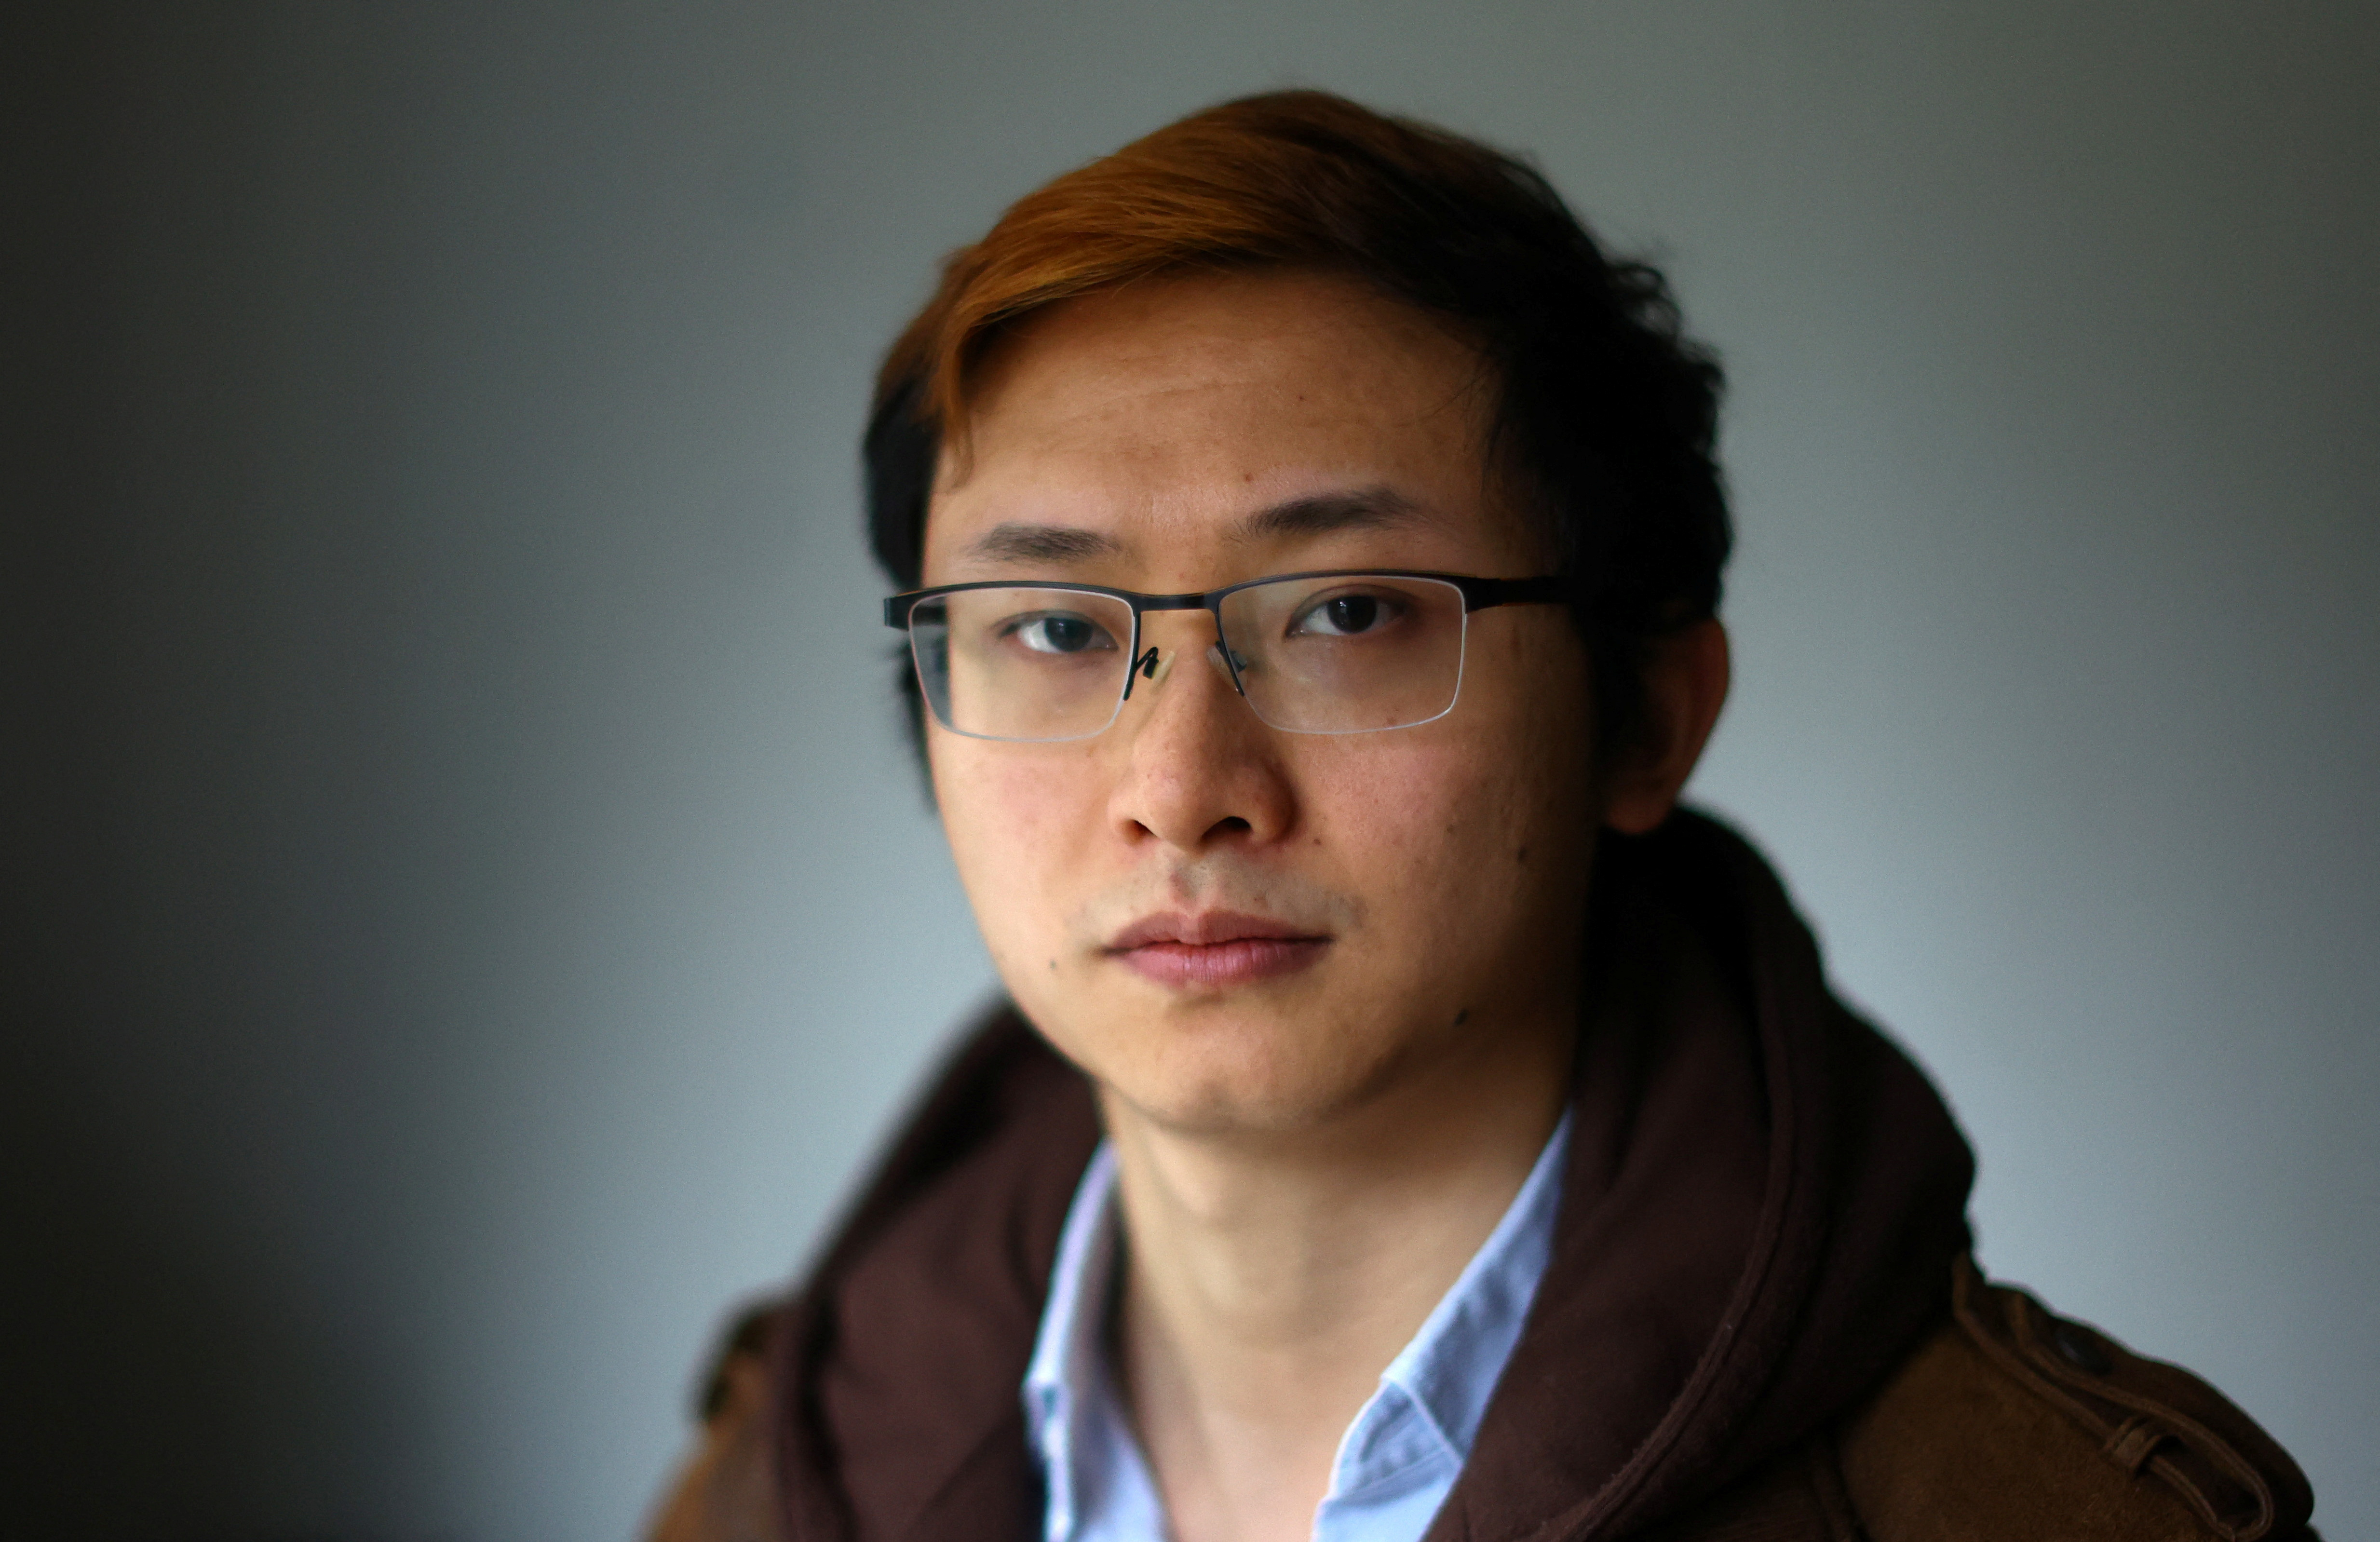 Junior Doctor Poh Wang poses for a photograph at his home in London